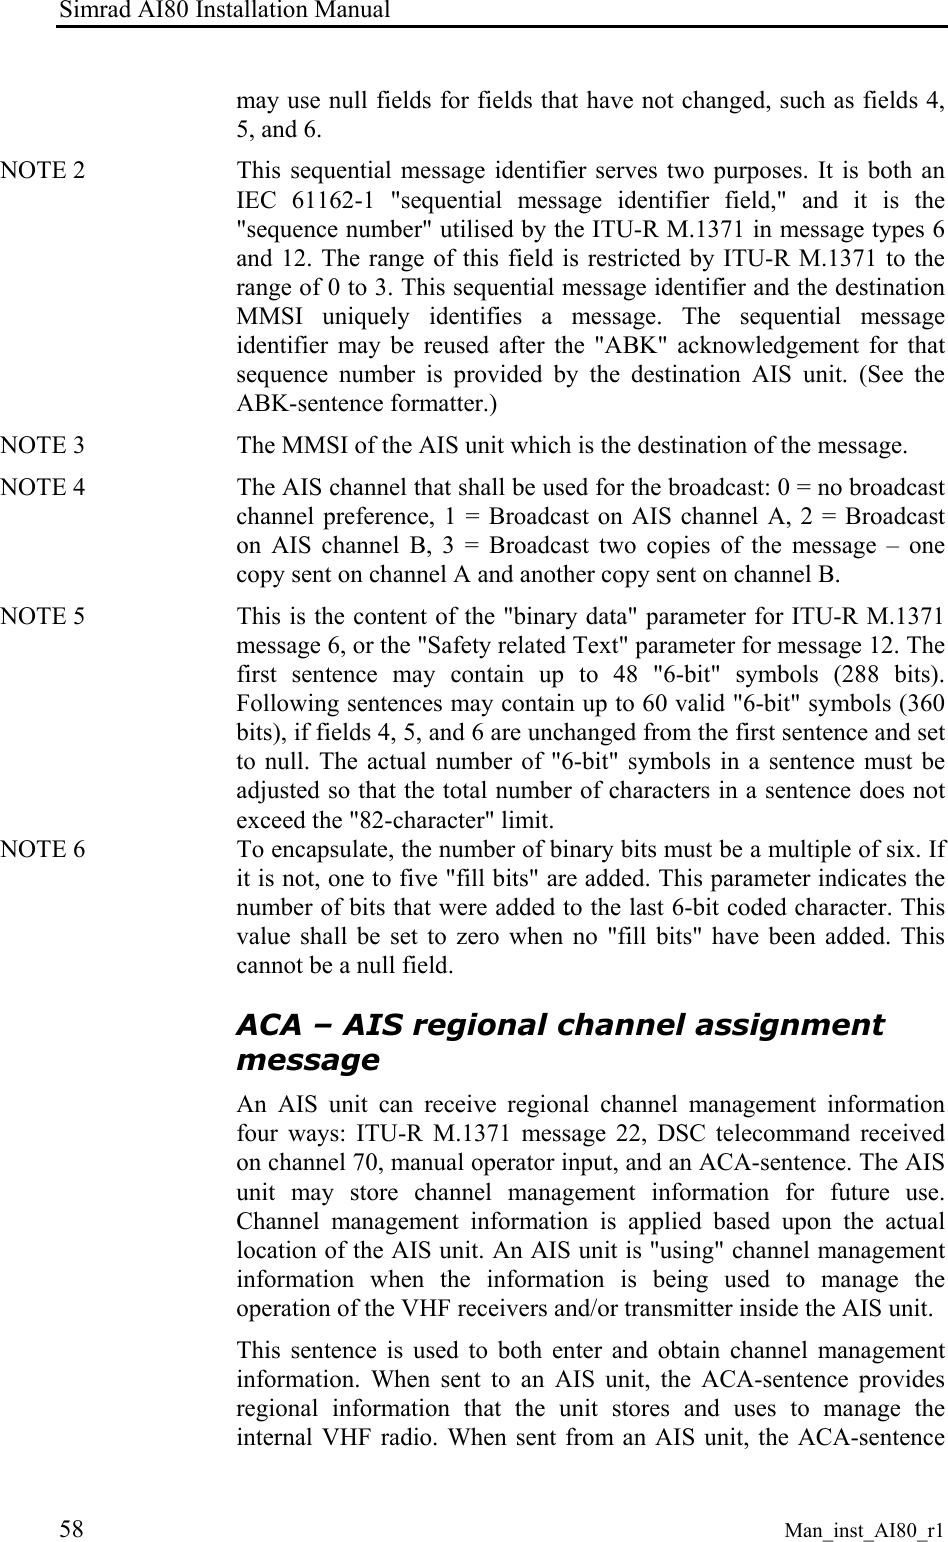 Simrad AI80 Installation Manual 58 Man_inst_AI80_r1 may use null fields for fields that have not changed, such as fields 4, 5, and 6. NOTE 2   This sequential message identifier serves two purposes. It is both an IEC 61162-1 &quot;sequential message identifier field,&quot; and it is the &quot;sequence number&quot; utilised by the ITU-R M.1371 in message types 6 and 12. The range of this field is restricted by ITU-R M.1371 to the range of 0 to 3. This sequential message identifier and the destination MMSI uniquely identifies a message. The sequential message identifier may be reused after the &quot;ABK&quot; acknowledgement for that sequence number is provided by the destination AIS unit. (See the ABK-sentence formatter.) NOTE 3   The MMSI of the AIS unit which is the destination of the message. NOTE 4   The AIS channel that shall be used for the broadcast: 0 = no broadcast channel preference, 1 = Broadcast on AIS channel A, 2 = Broadcast on AIS channel B, 3 = Broadcast two copies of the message – one copy sent on channel A and another copy sent on channel B. NOTE 5   This is the content of the &quot;binary data&quot; parameter for ITU-R M.1371 message 6, or the &quot;Safety related Text&quot; parameter for message 12. The first sentence may contain up to 48 &quot;6-bit&quot; symbols (288 bits). Following sentences may contain up to 60 valid &quot;6-bit&quot; symbols (360 bits), if fields 4, 5, and 6 are unchanged from the first sentence and set to null. The actual number of &quot;6-bit&quot; symbols in a sentence must be adjusted so that the total number of characters in a sentence does not exceed the &quot;82-character&quot; limit. NOTE 6   To encapsulate, the number of binary bits must be a multiple of six. If it is not, one to five &quot;fill bits&quot; are added. This parameter indicates the number of bits that were added to the last 6-bit coded character. This value shall be set to zero when no &quot;fill bits&quot; have been added. This cannot be a null field. ACA – AIS regional channel assignment message An AIS unit can receive regional channel management information four ways: ITU-R M.1371 message 22, DSC telecommand received on channel 70, manual operator input, and an ACA-sentence. The AIS unit may store channel management information for future use. Channel management information is applied based upon the actual location of the AIS unit. An AIS unit is &quot;using&quot; channel management information when the information is being used to manage the operation of the VHF receivers and/or transmitter inside the AIS unit.  This sentence is used to both enter and obtain channel management information. When sent to an AIS unit, the ACA-sentence provides regional information that the unit stores and uses to manage the internal VHF radio. When sent from an AIS unit, the ACA-sentence 